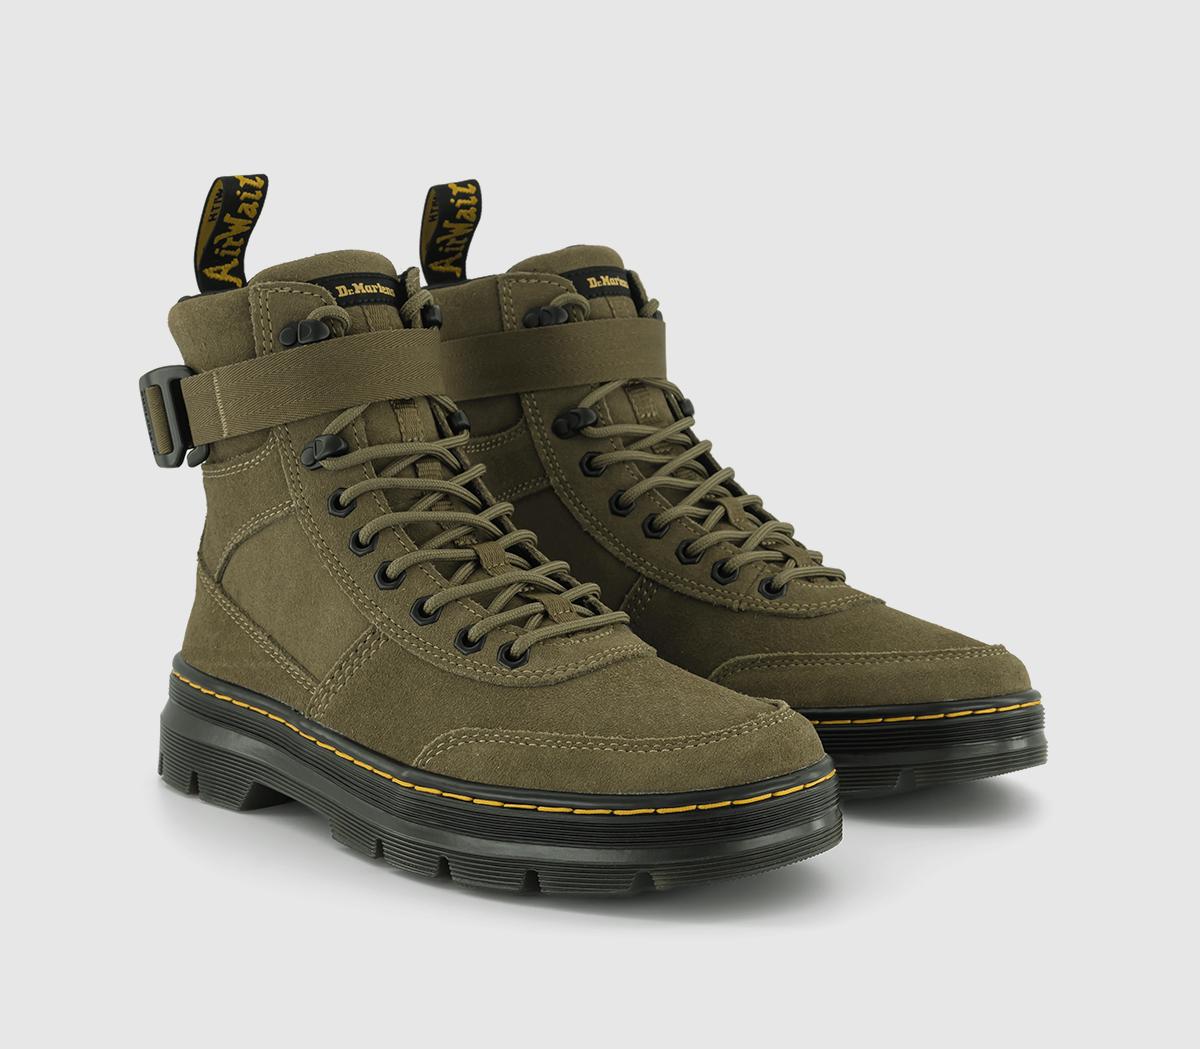 Dr. Martens Mens Combs Tech Boots Dms Olive Eh Suede Green, 7